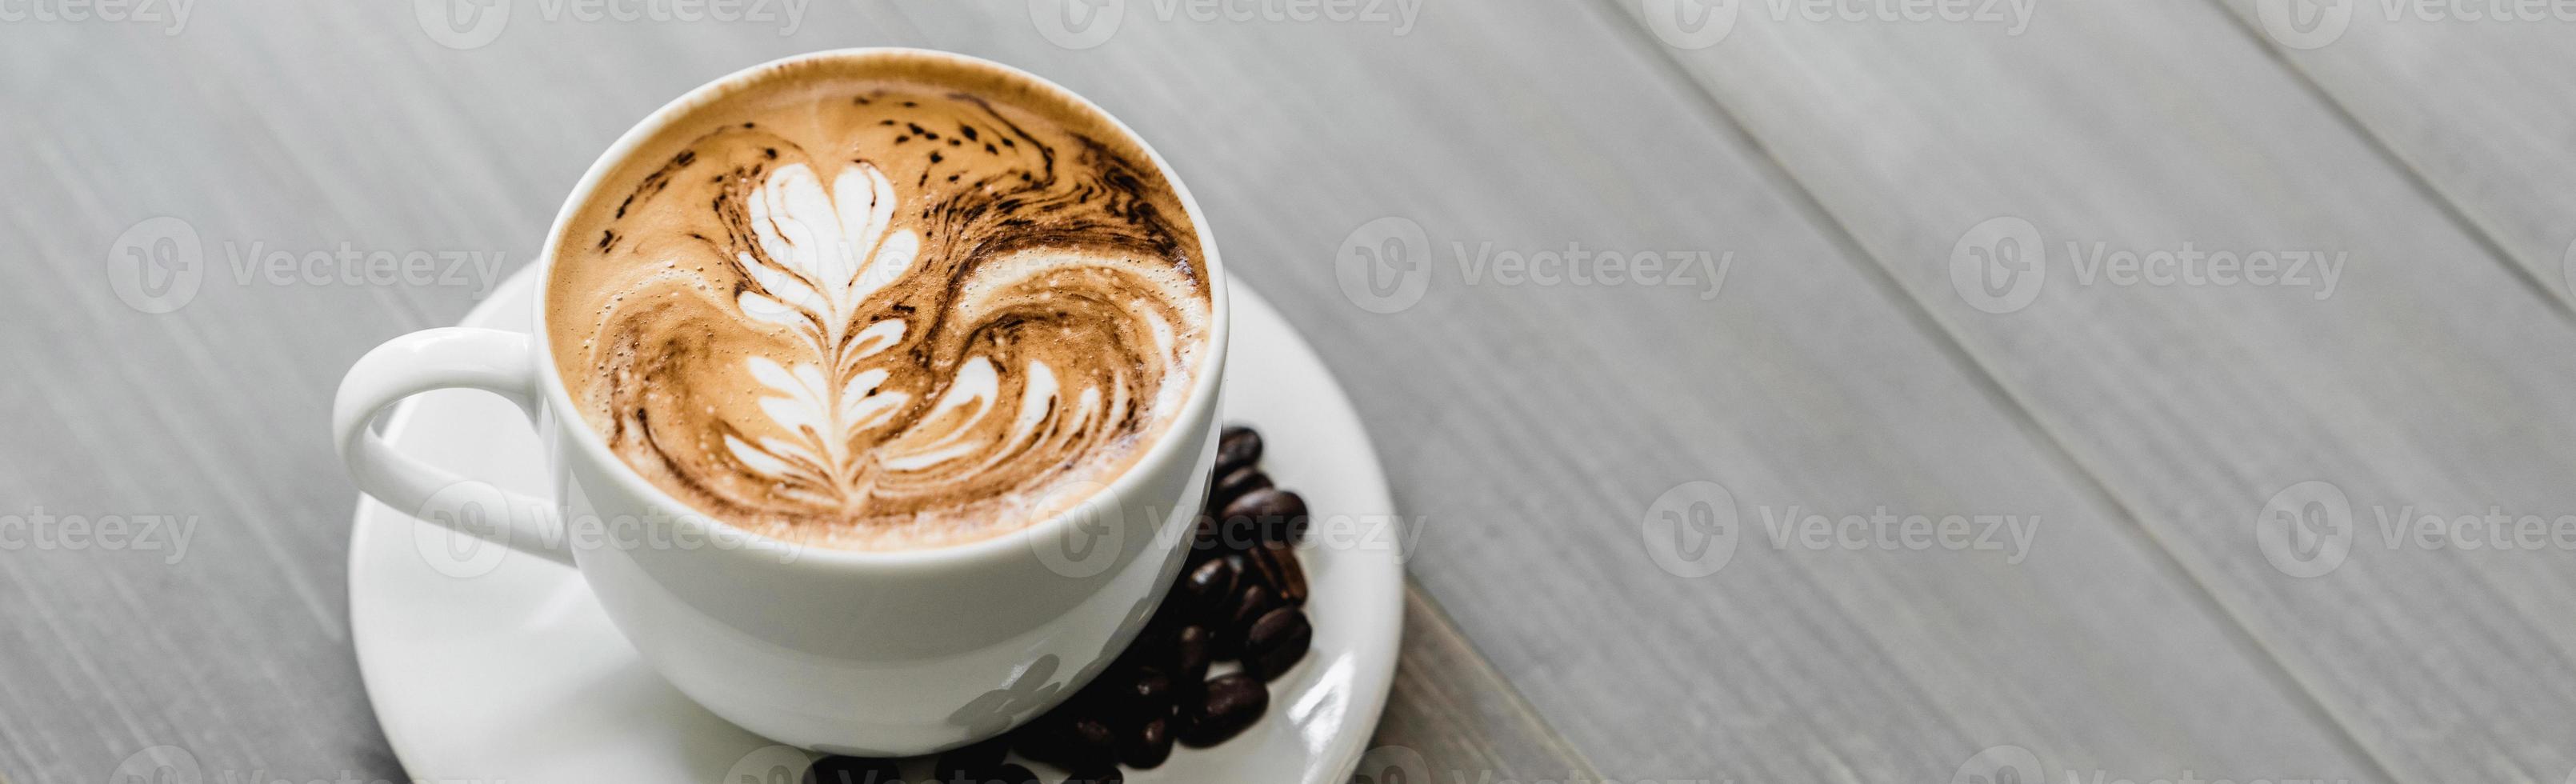 Fresh brewed coffee with fern pattern latte art in white cup photo